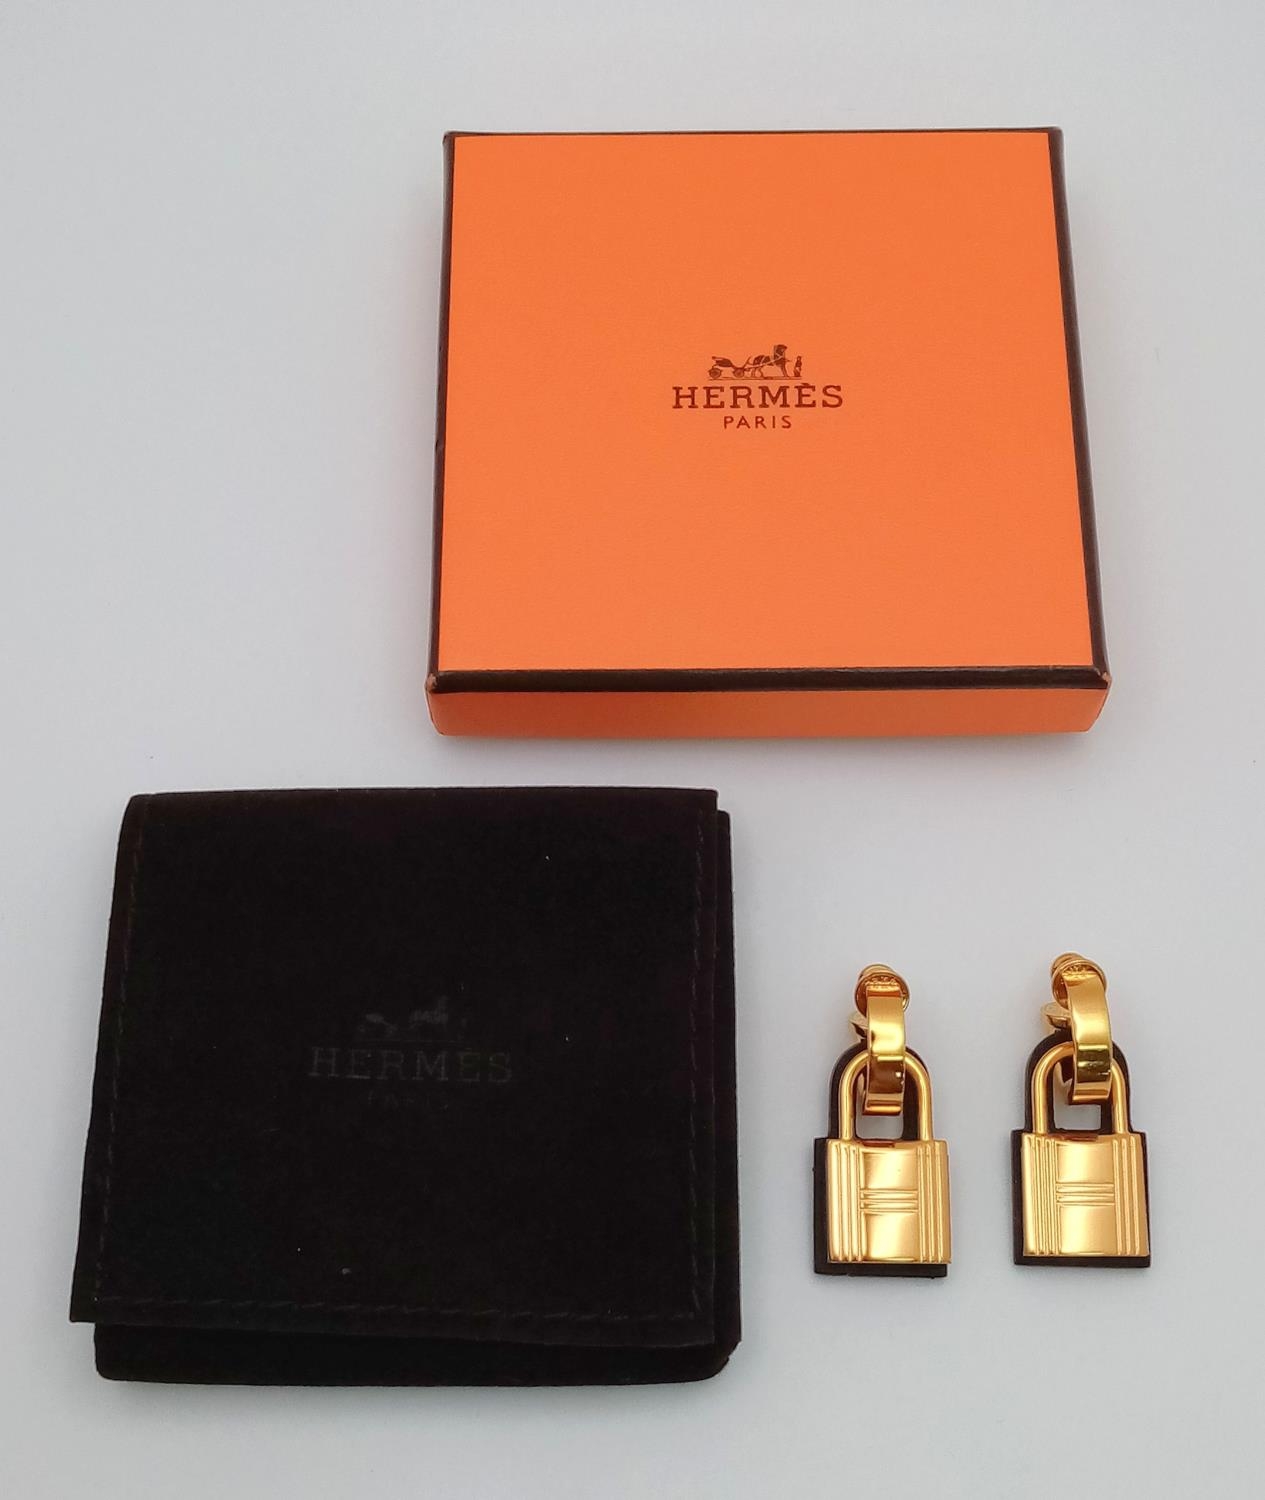 A Pair of Designer Gold Plated Hermes Padlock Earrings. Comes with original packaging. - Image 6 of 7